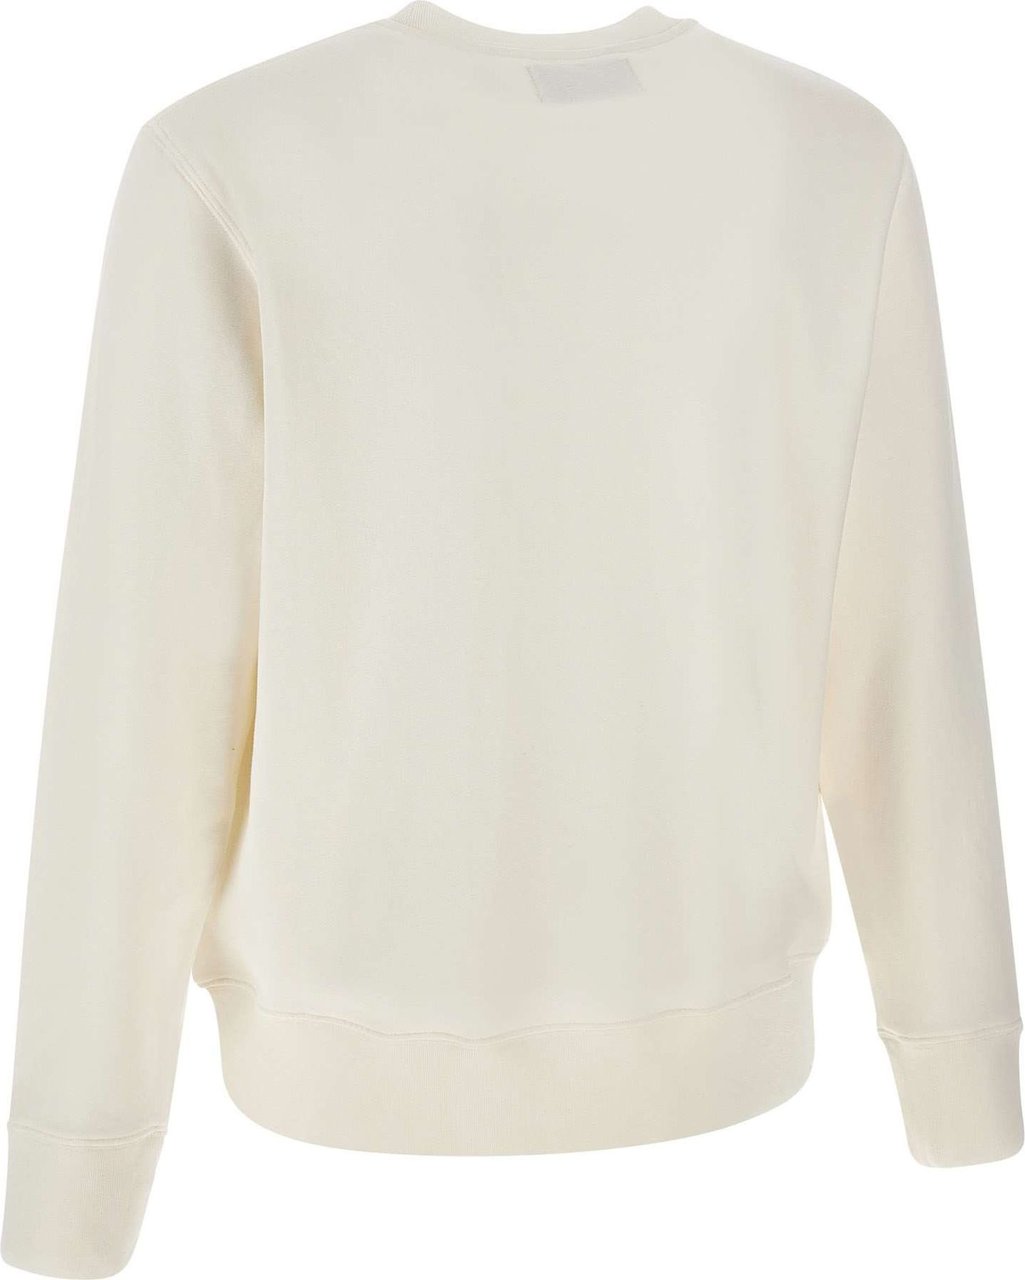 Autry Sweaters White Wit